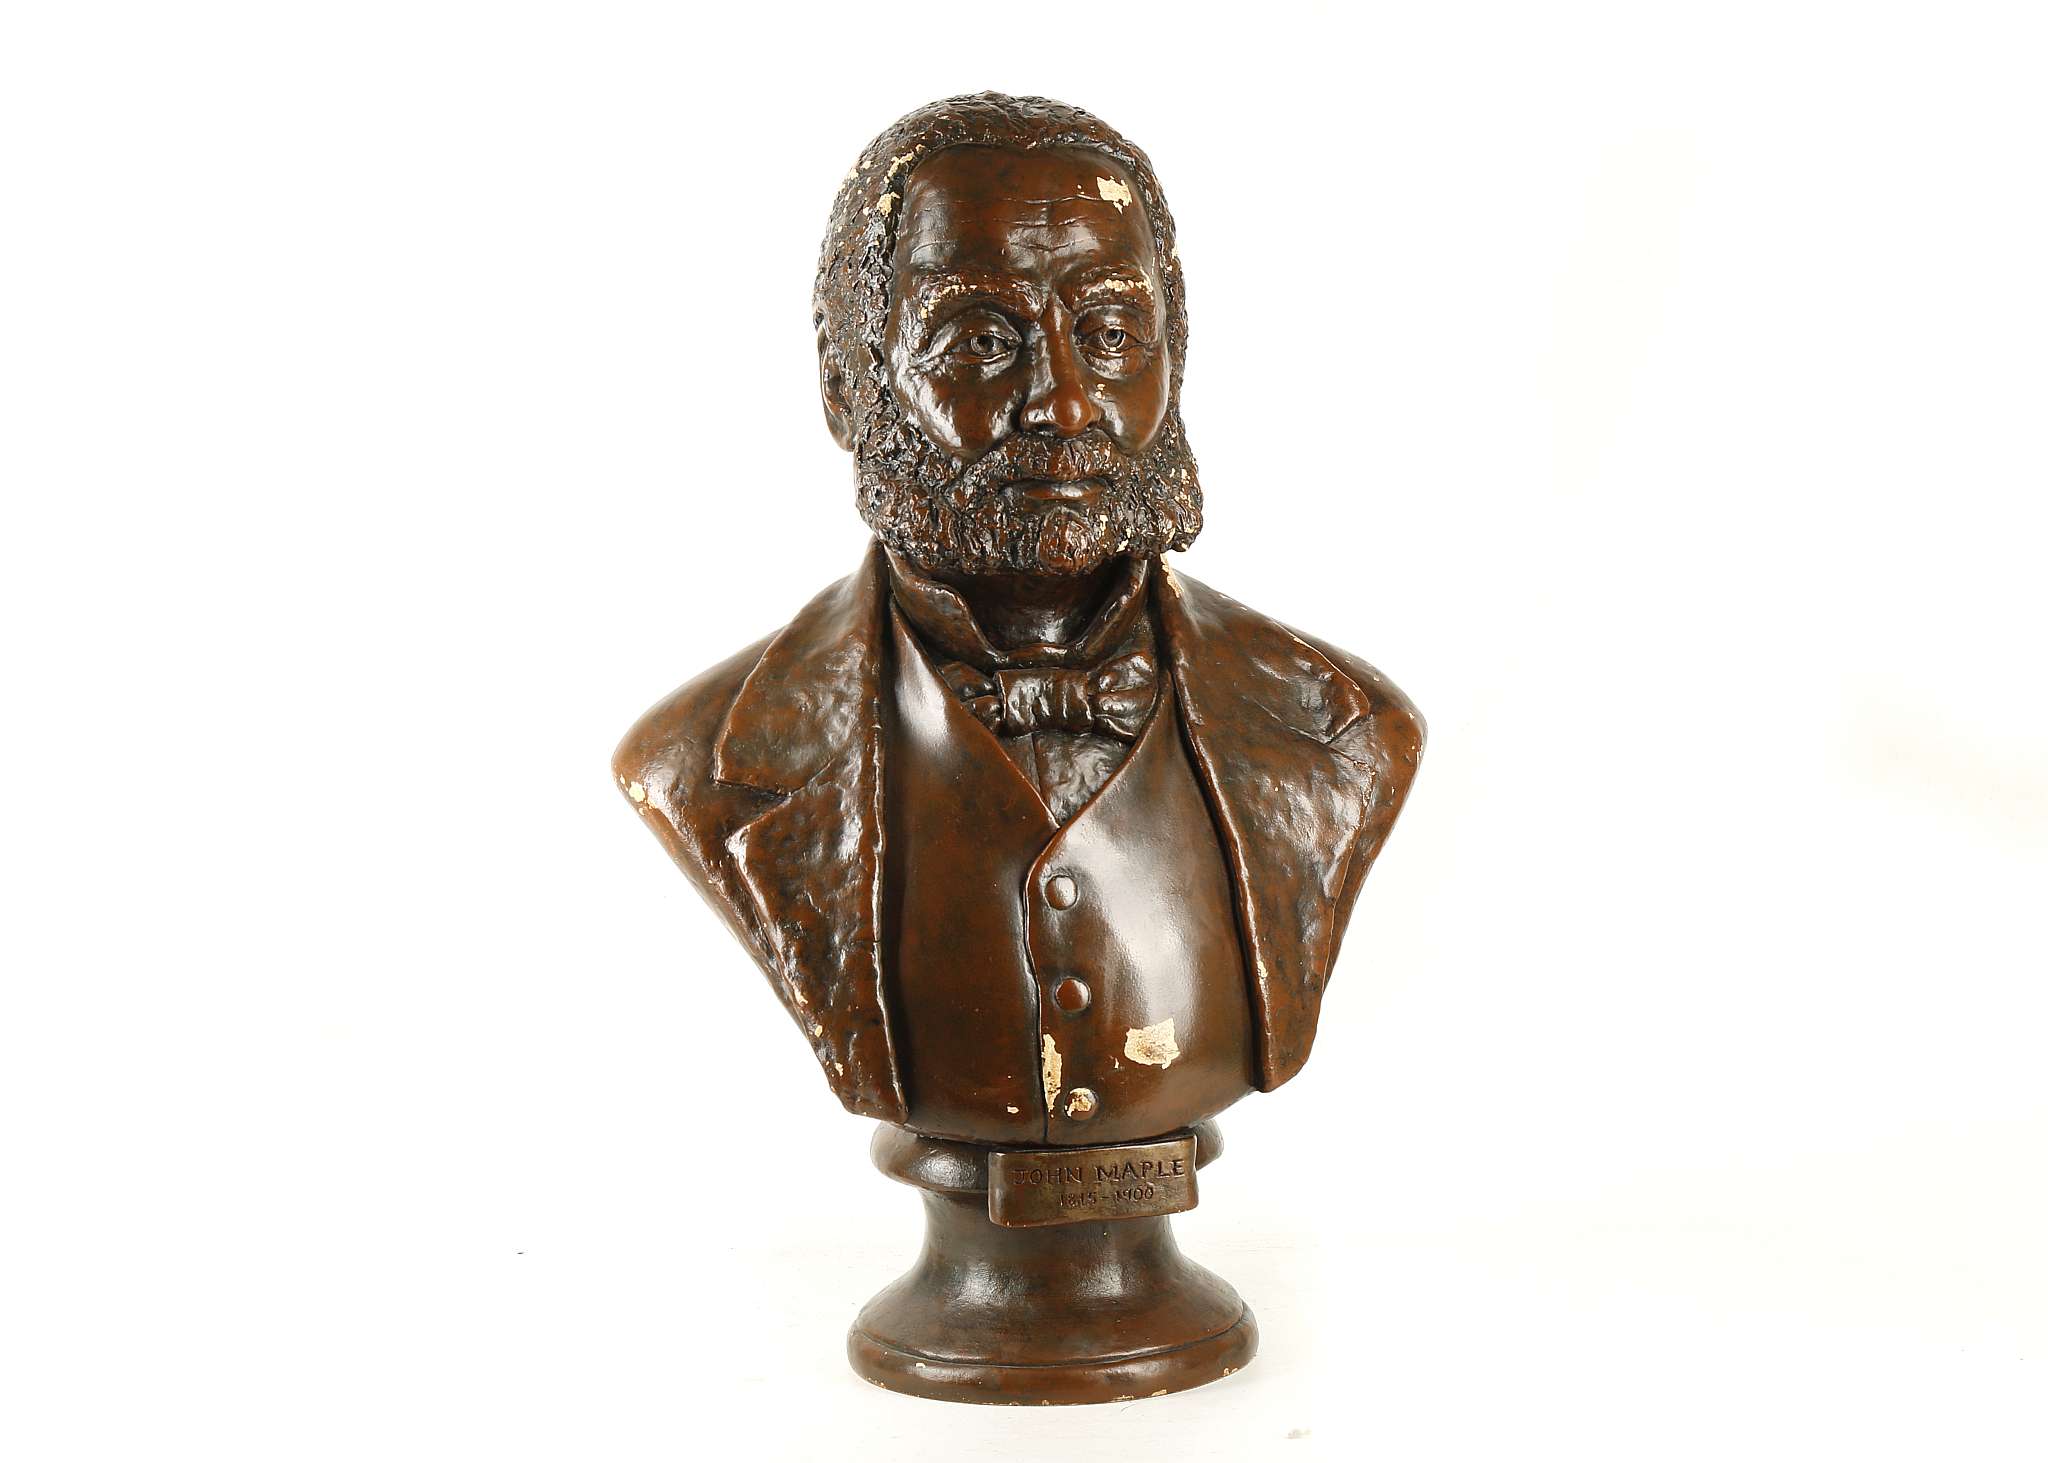 D. Kerpnar? Composite bust, study of John Maple (1815-1900) founder of Maple & Co., furniture